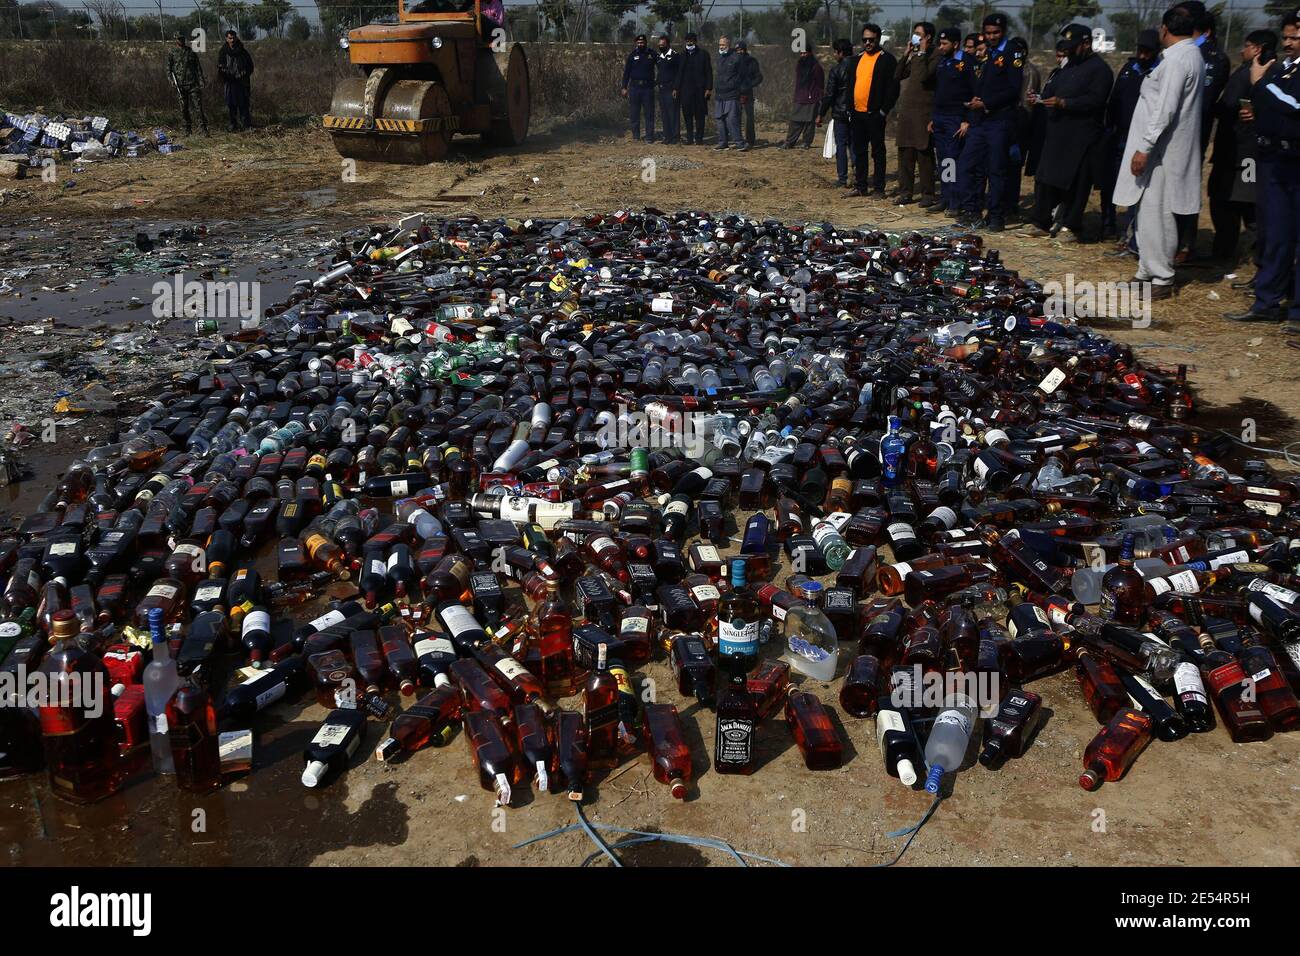 Custom officials destroying the alcohol bottles and burning the seized drugs during drug burning ceremony, on the eve of International Customs Day Stock Photo